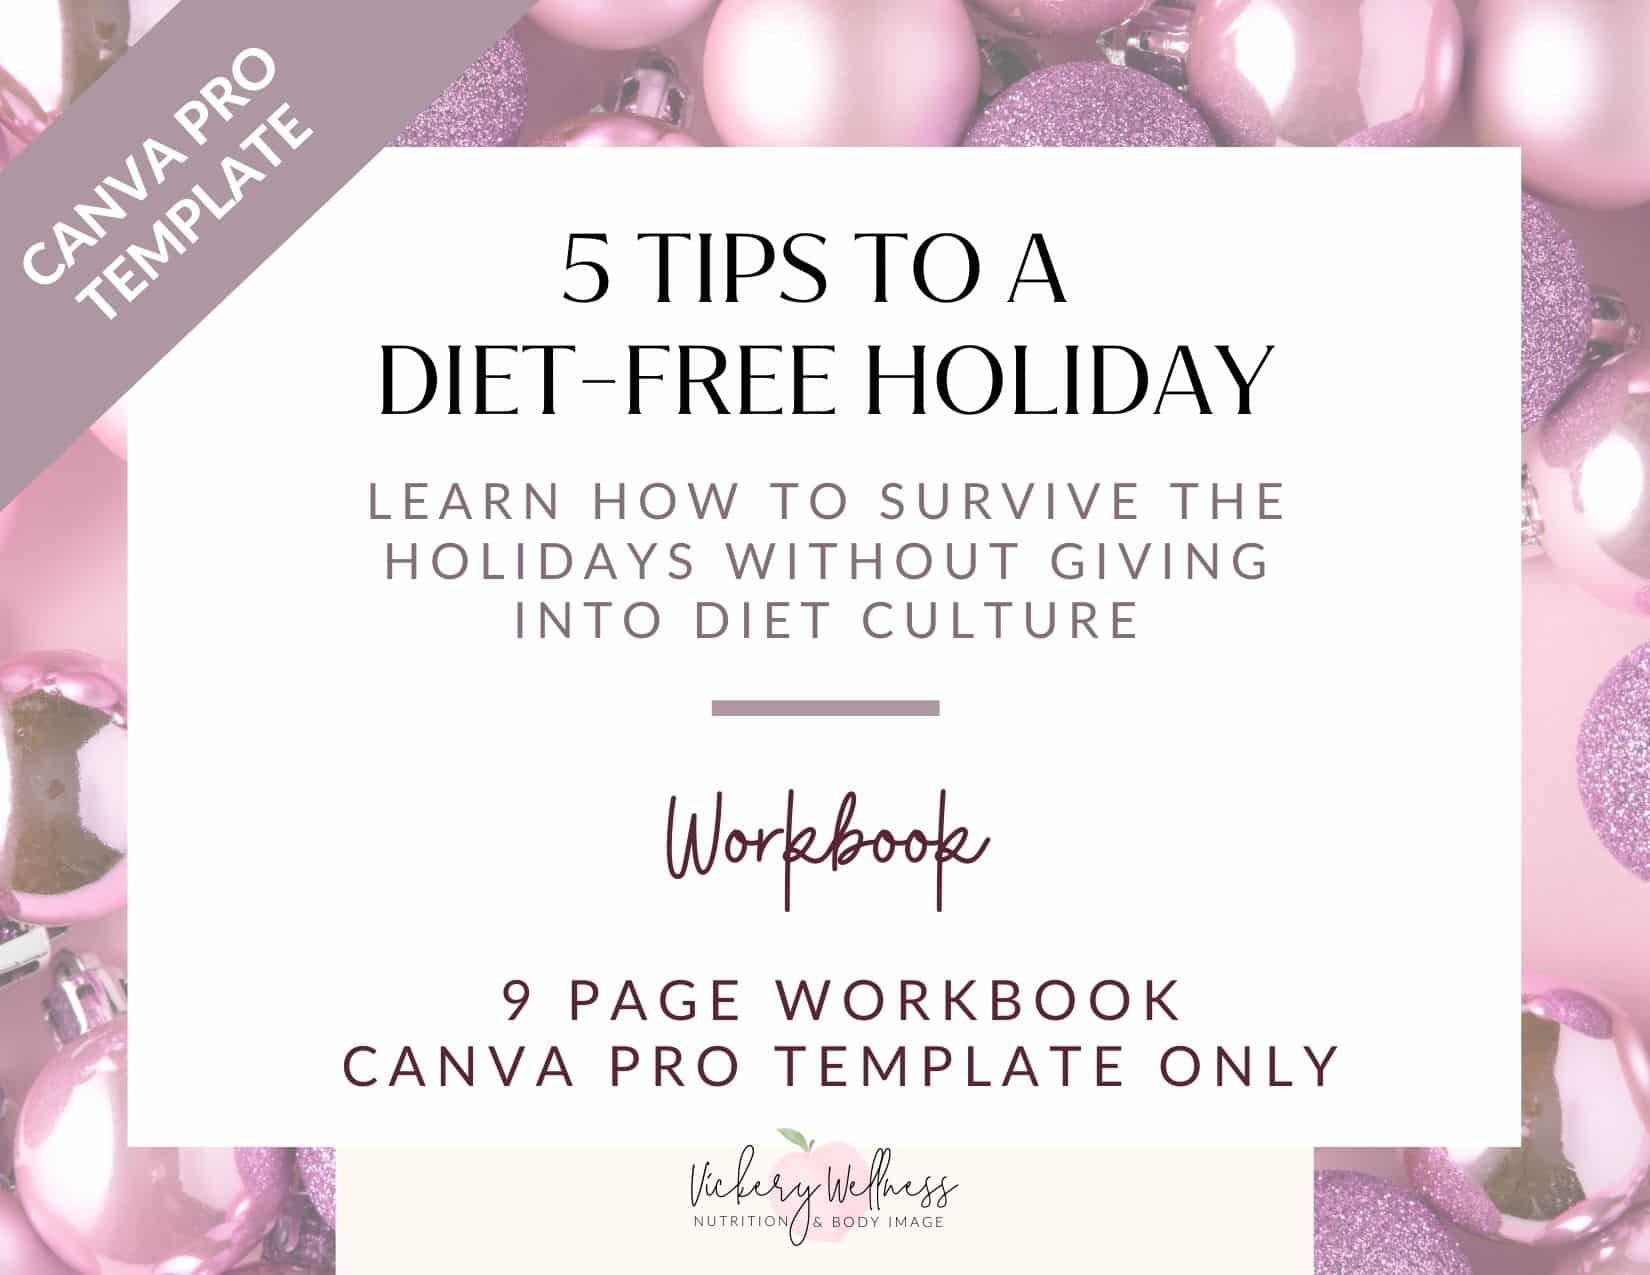 how to have a diet free holiday without diet culture presentation for dietitian nutritionists